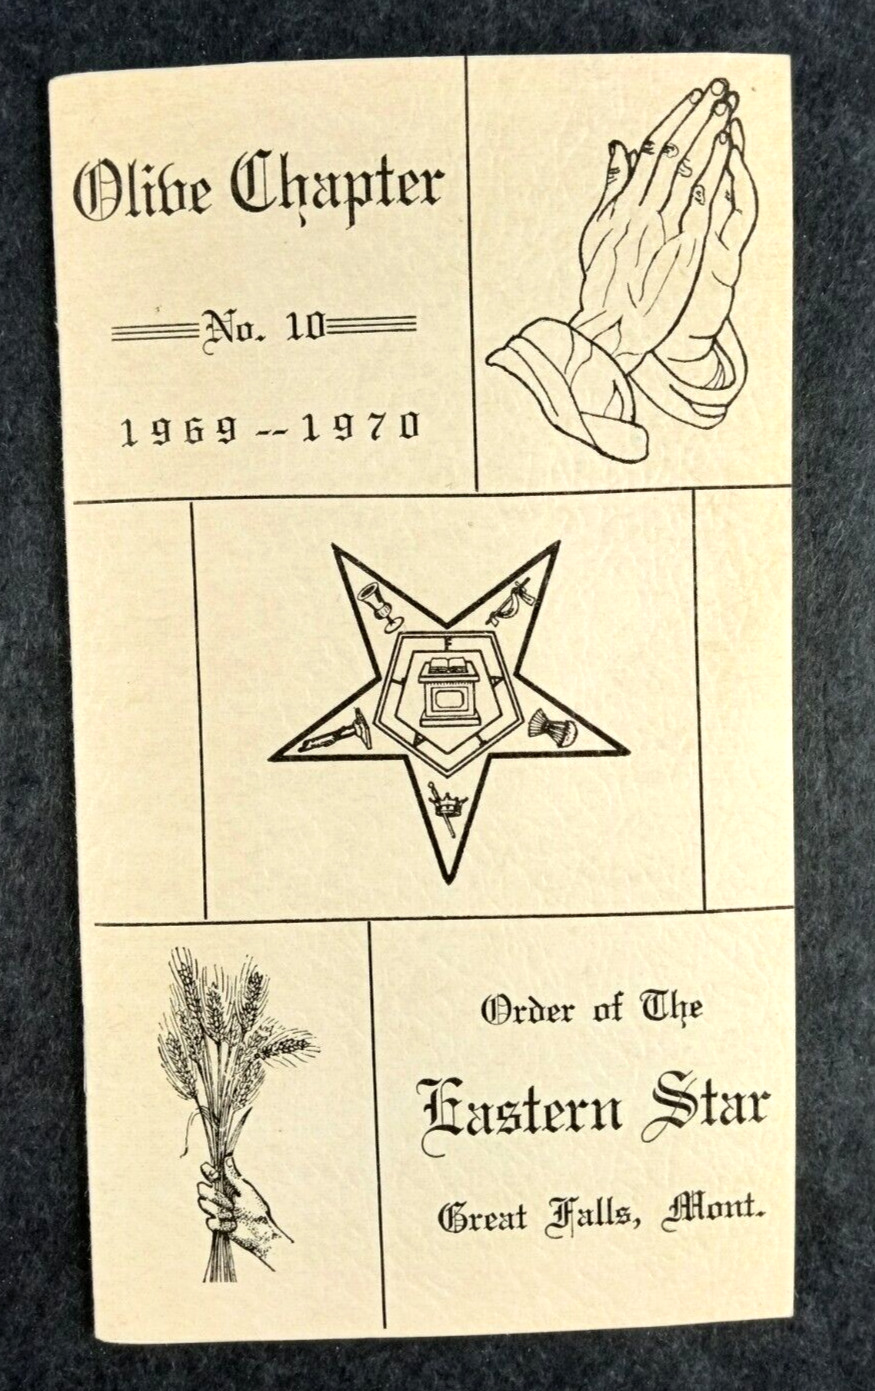 Great Falls MT Order of the Eastern Star Olive Chapter Handbook 1969 1970 e1-25